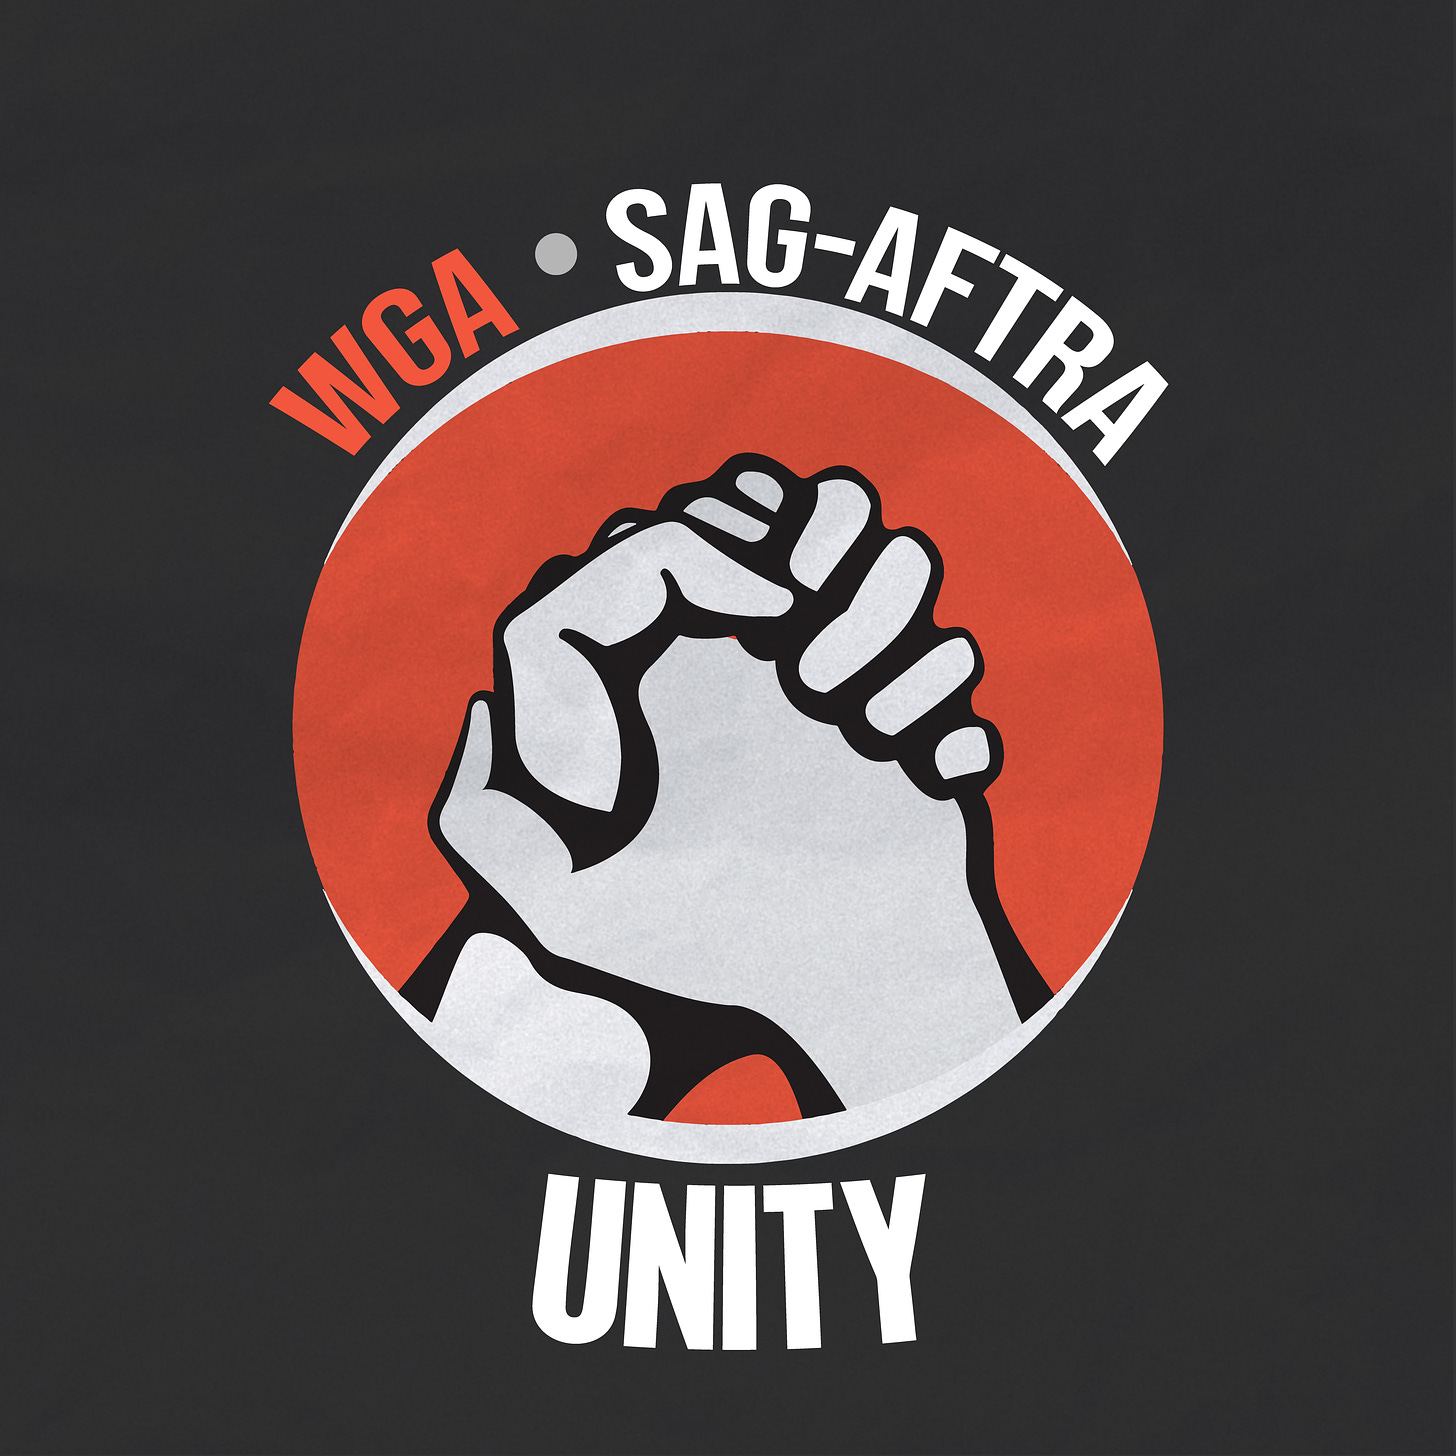 Image of two hands clasping. Captioned WGA SAG-AFTRA UNITY